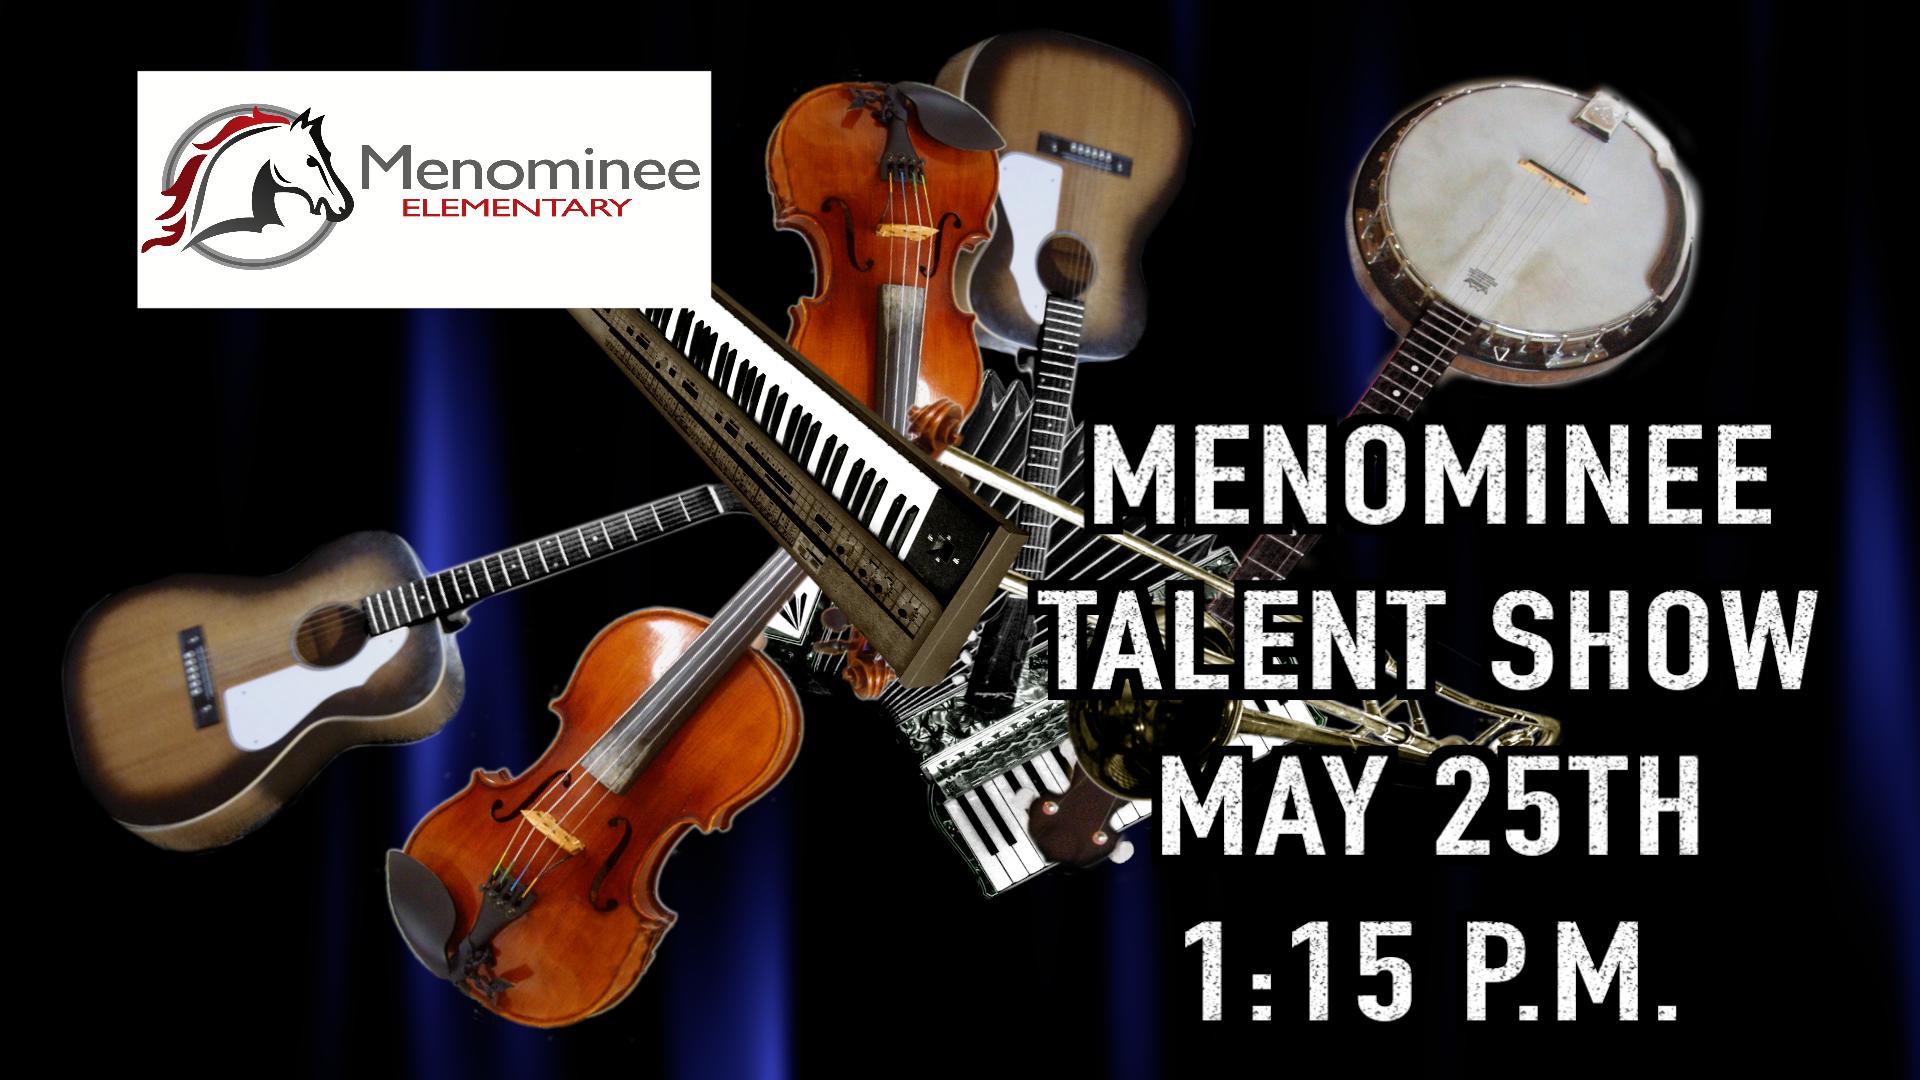 Menominee Talent Show May 25th 1:15 p.m. Menominee Elementary Logo with musical instruments